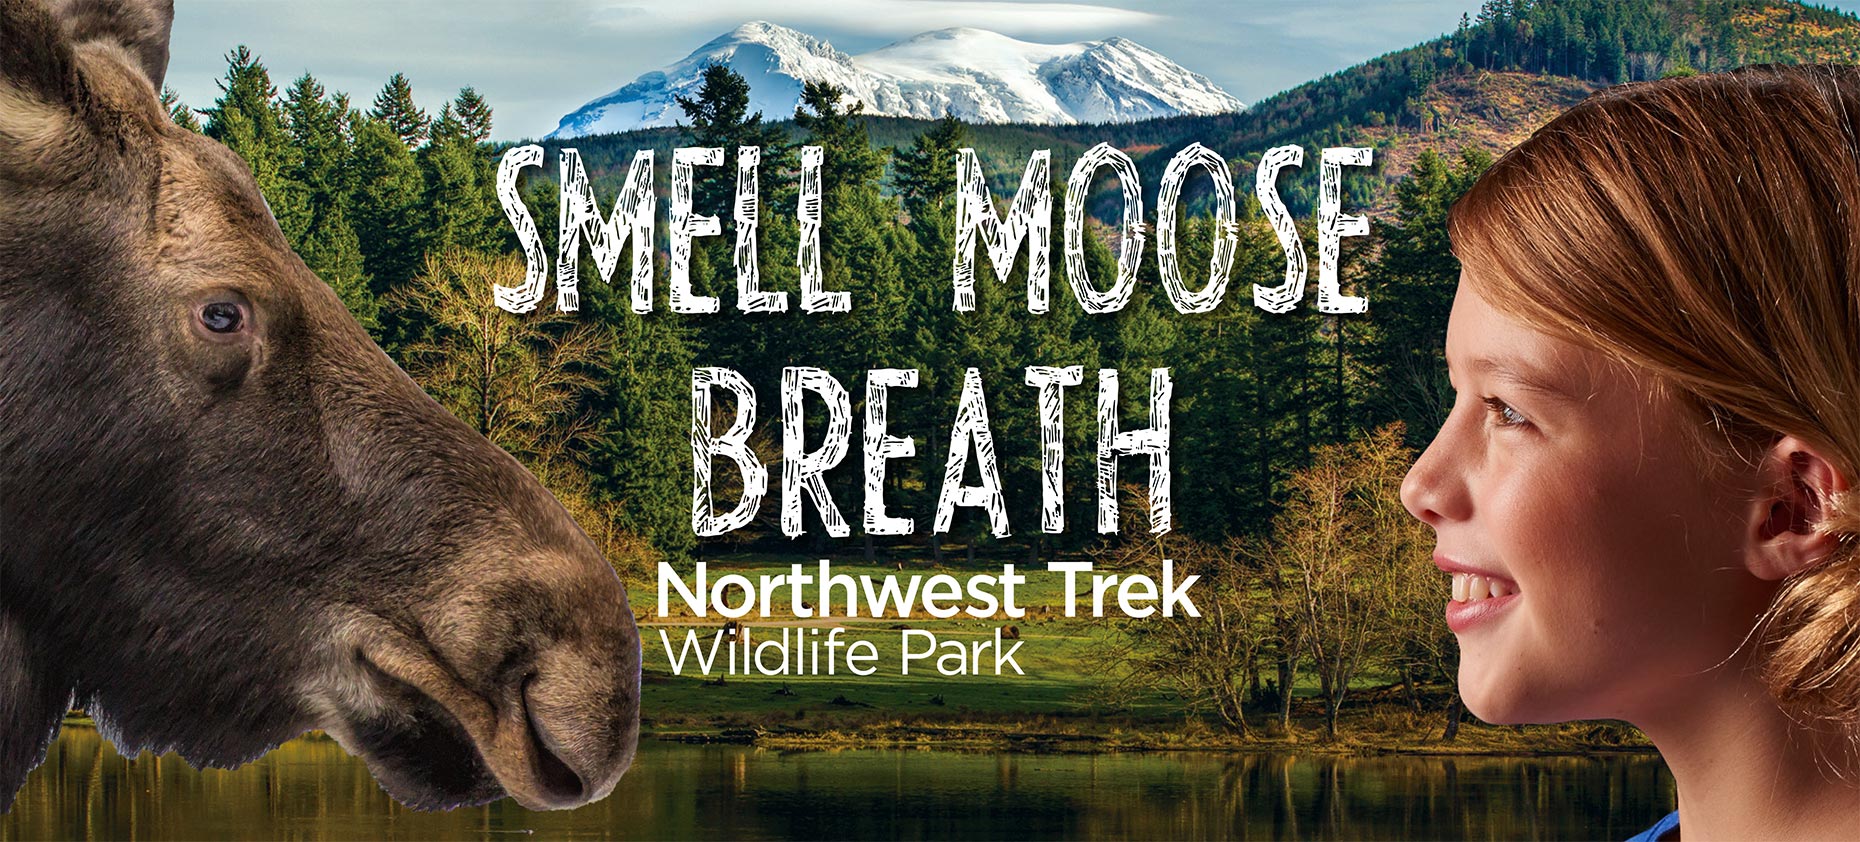 Moose and Girl in Northwest Trek  advertising campaign photo